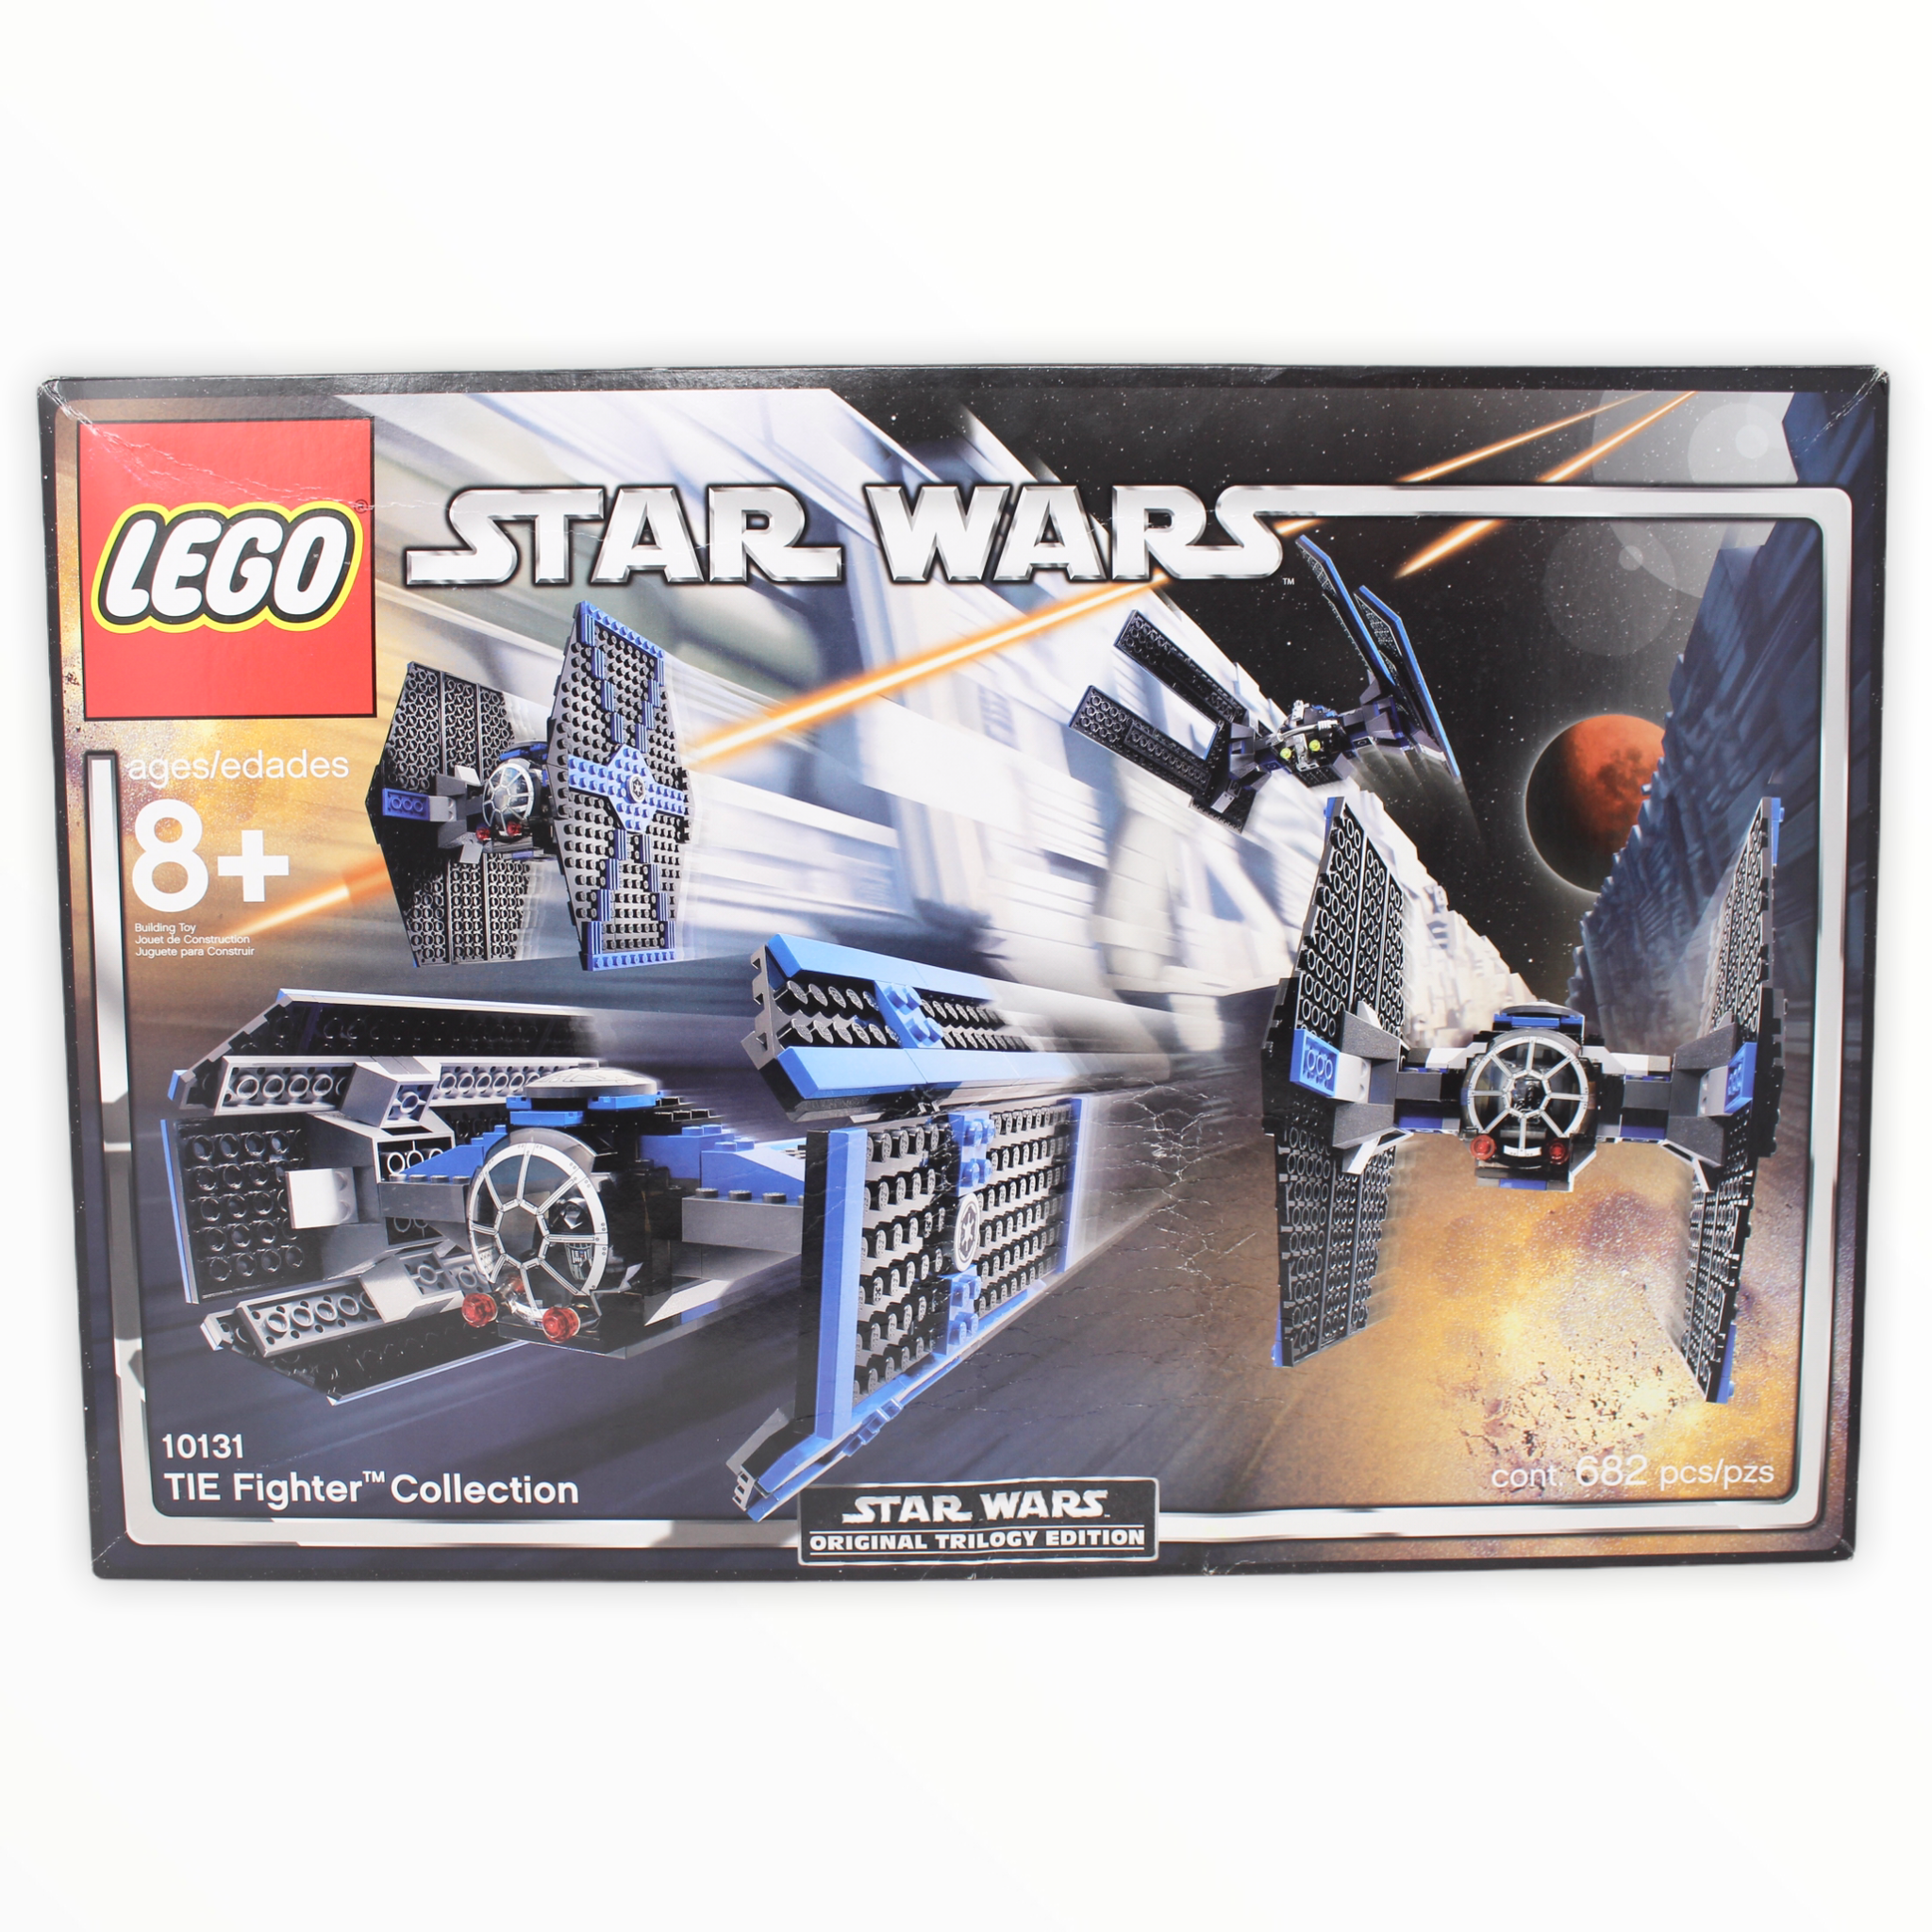 Certified Used Set 10131 Star Wars TIE Fighter Collection